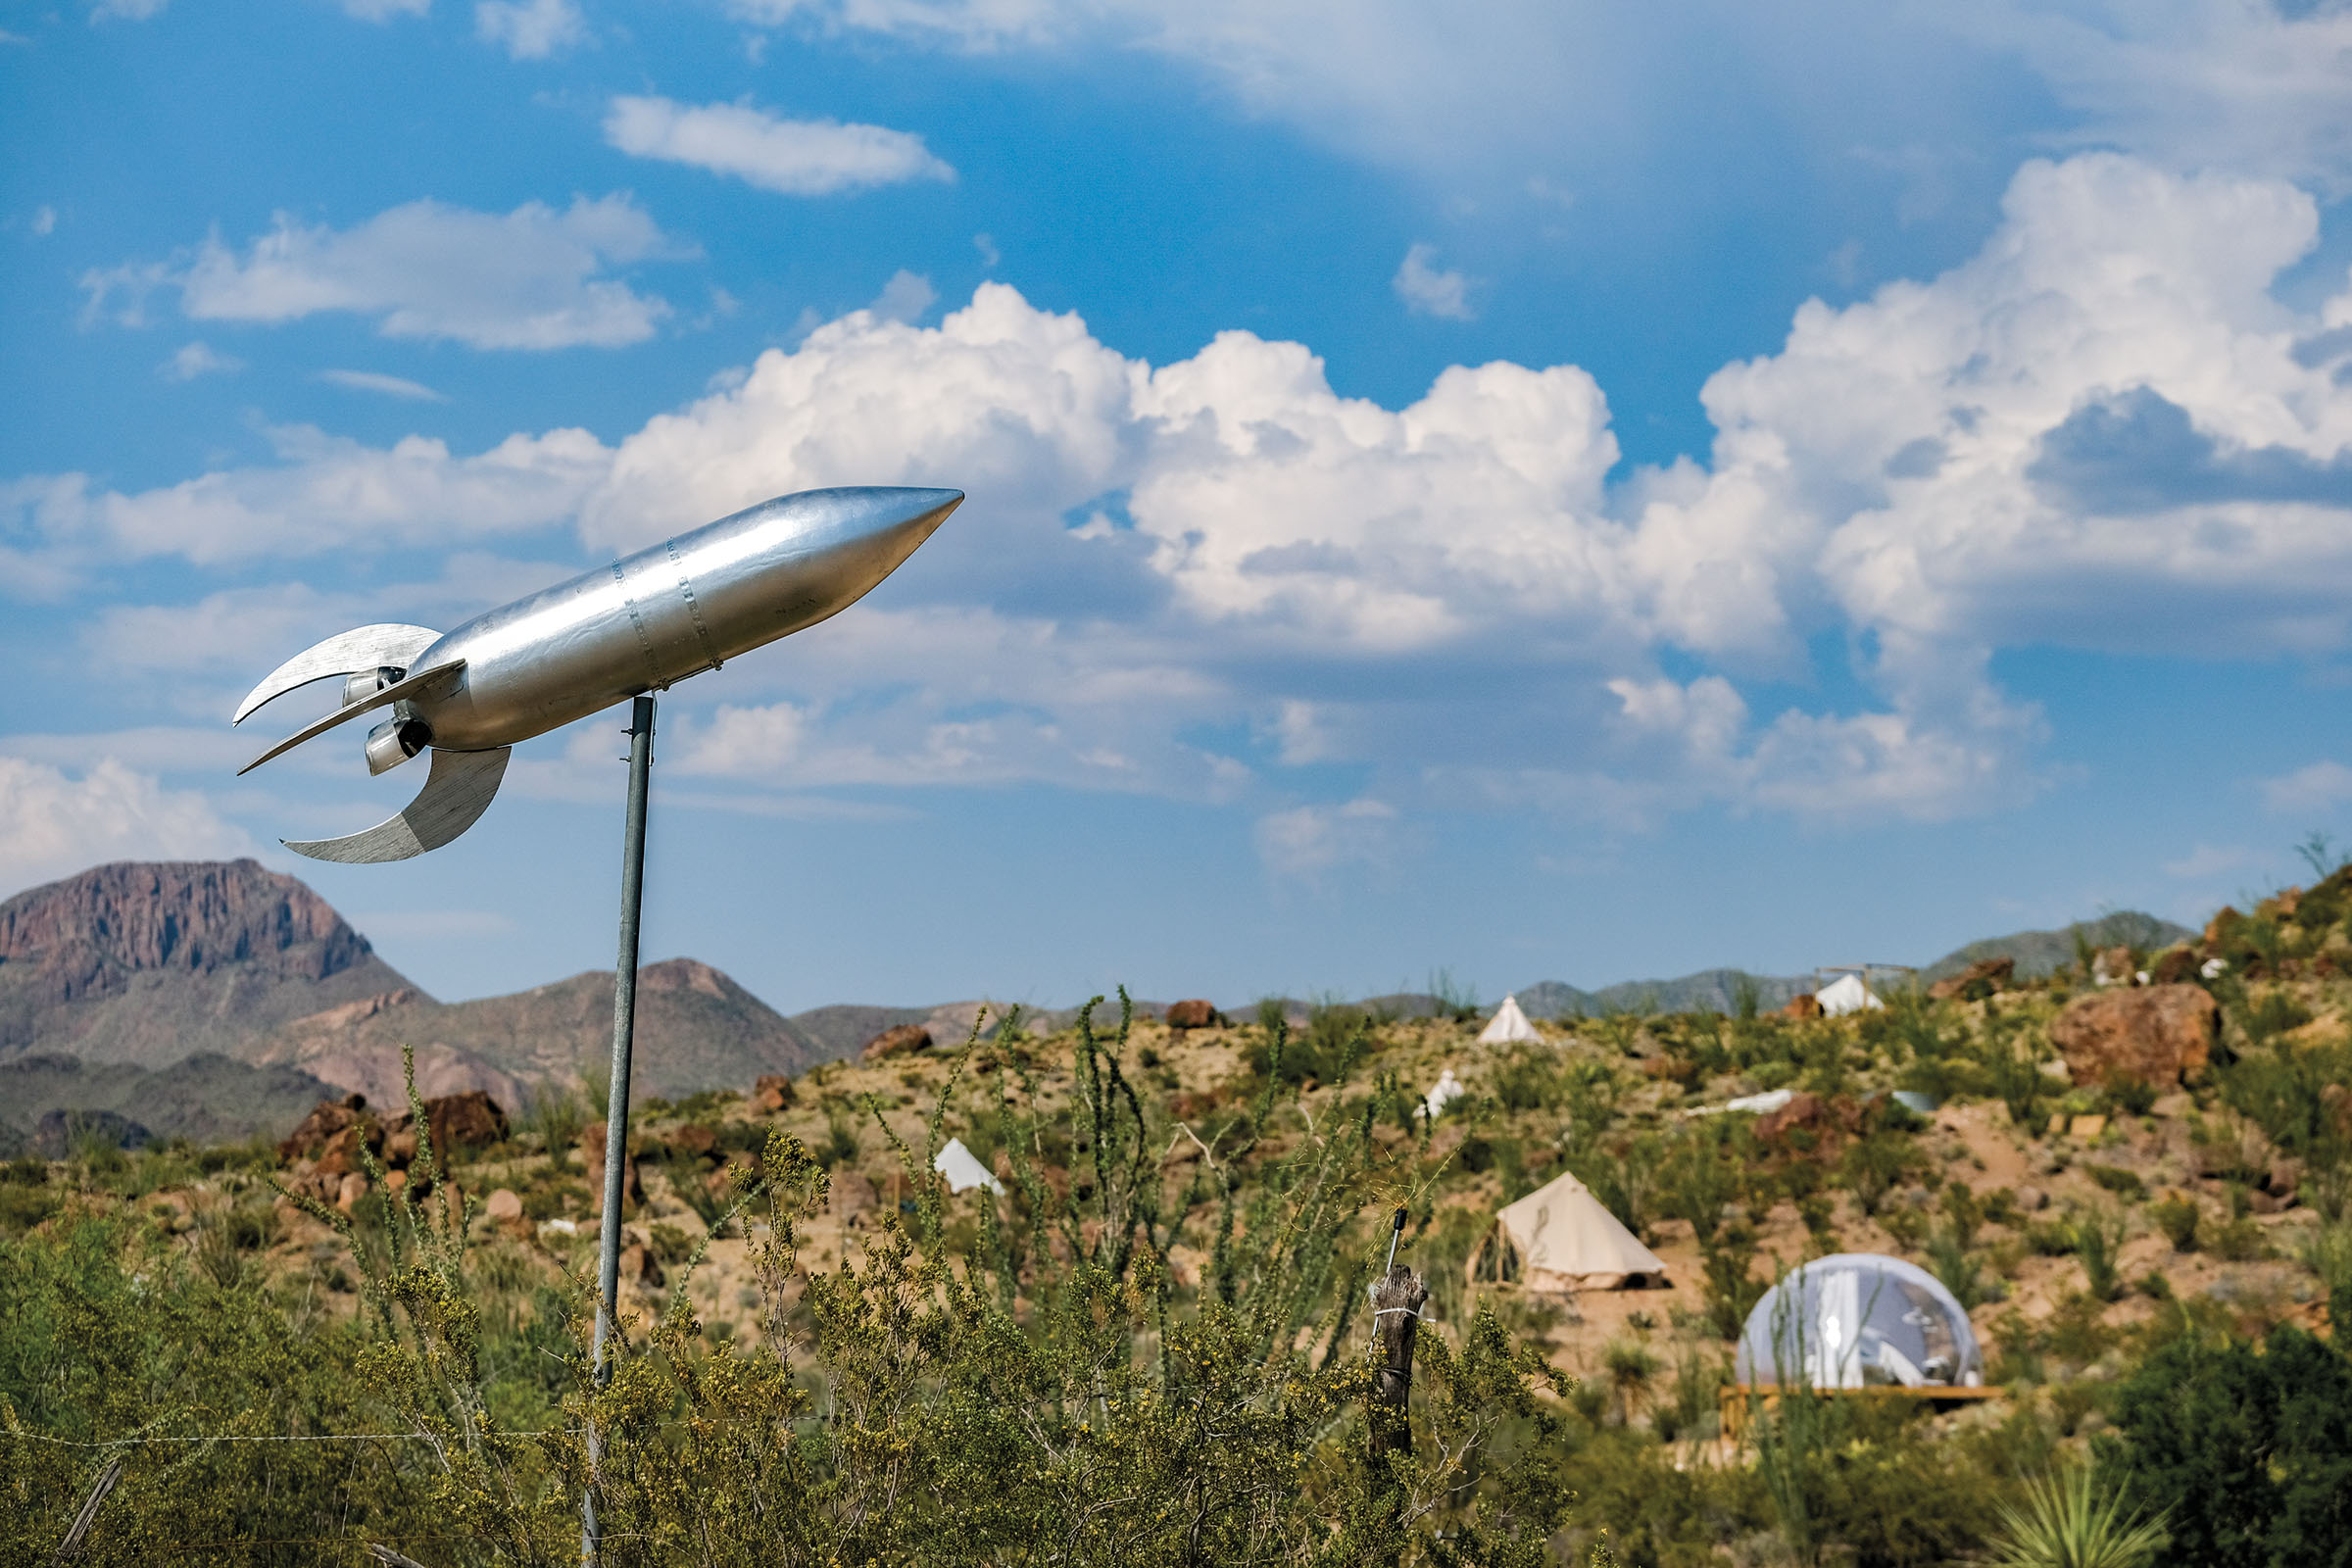 A silver rocket in front of a desert landscape with clouds and blue sky